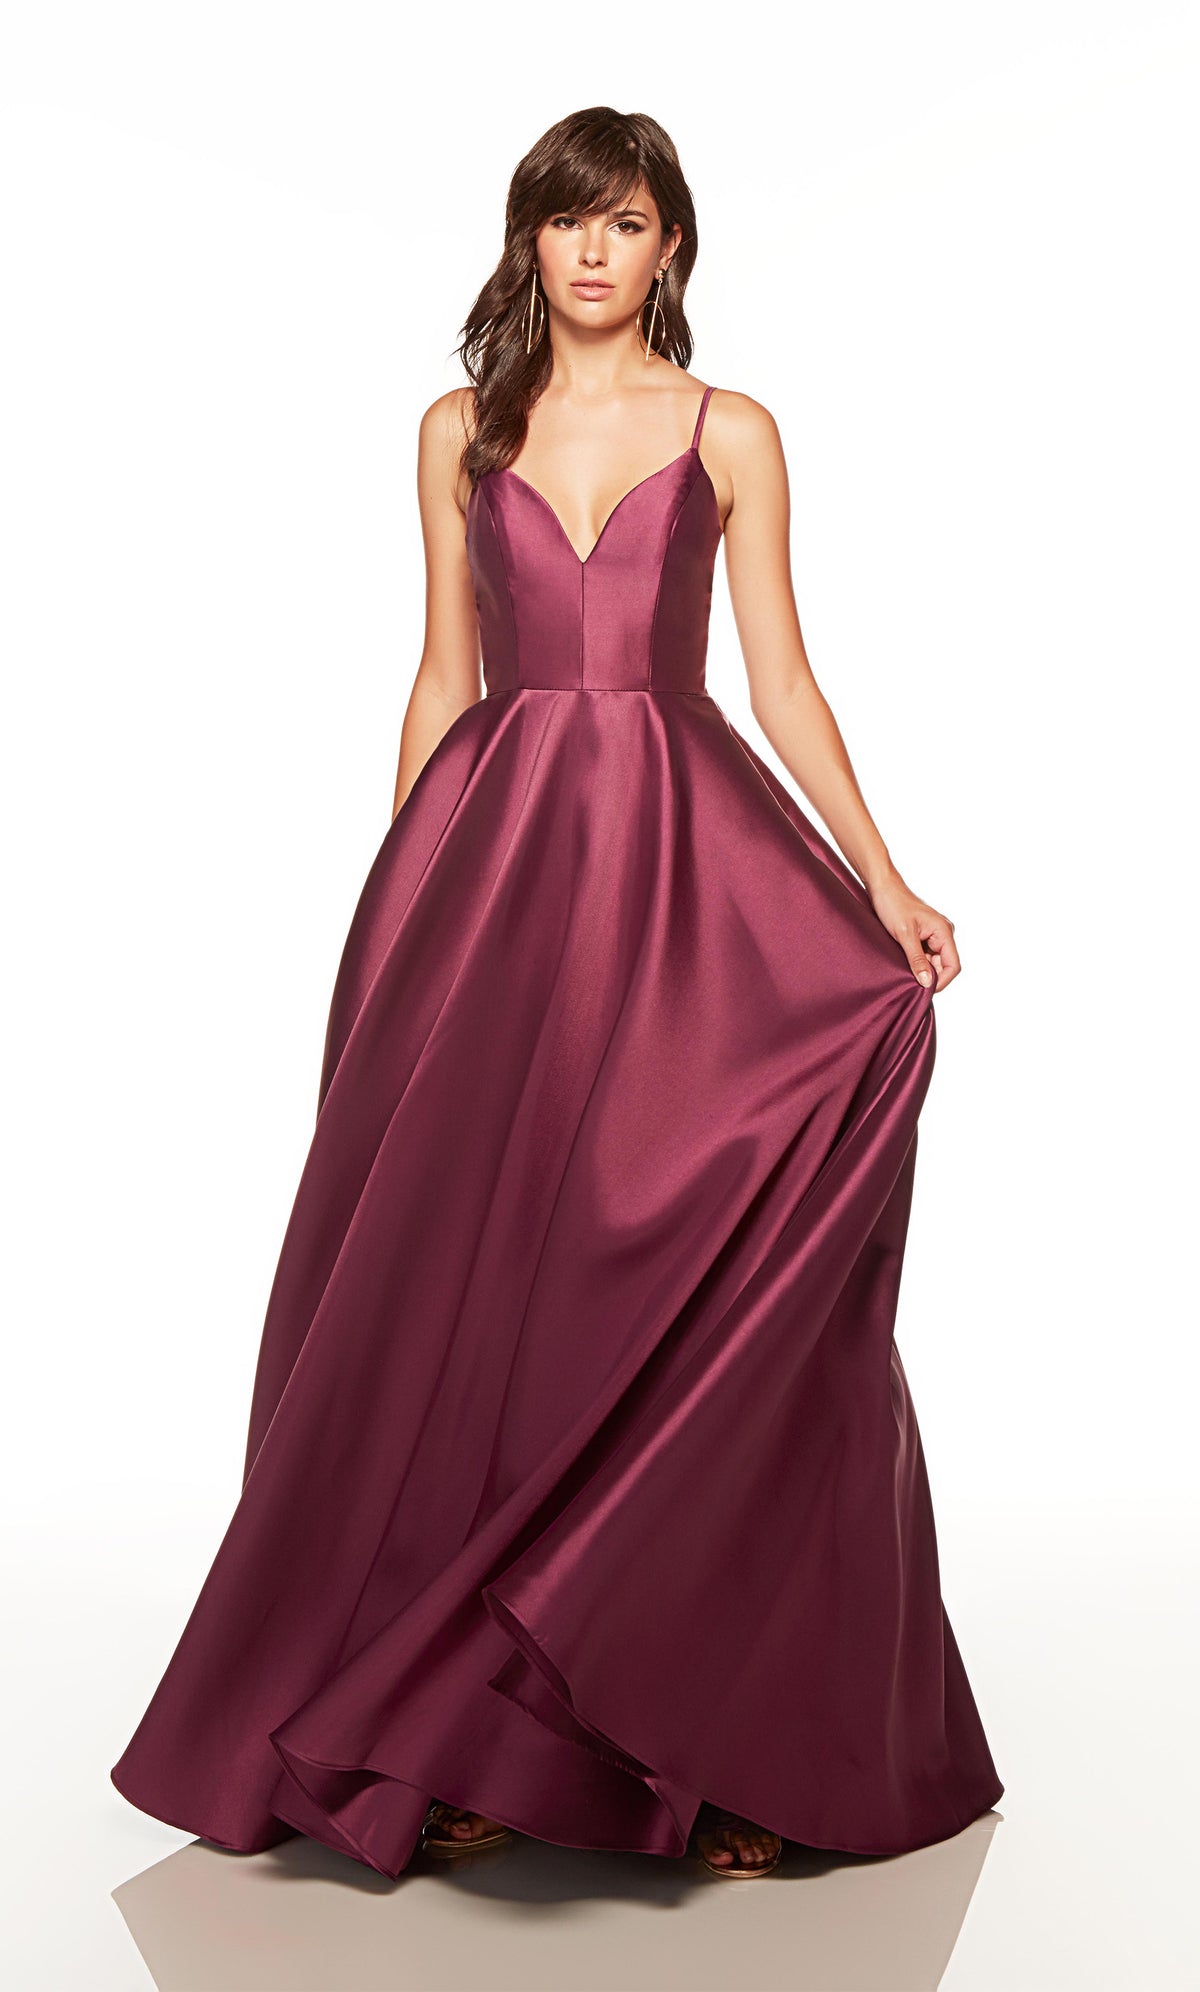 Formal ballgown with pockets in the color black plum.